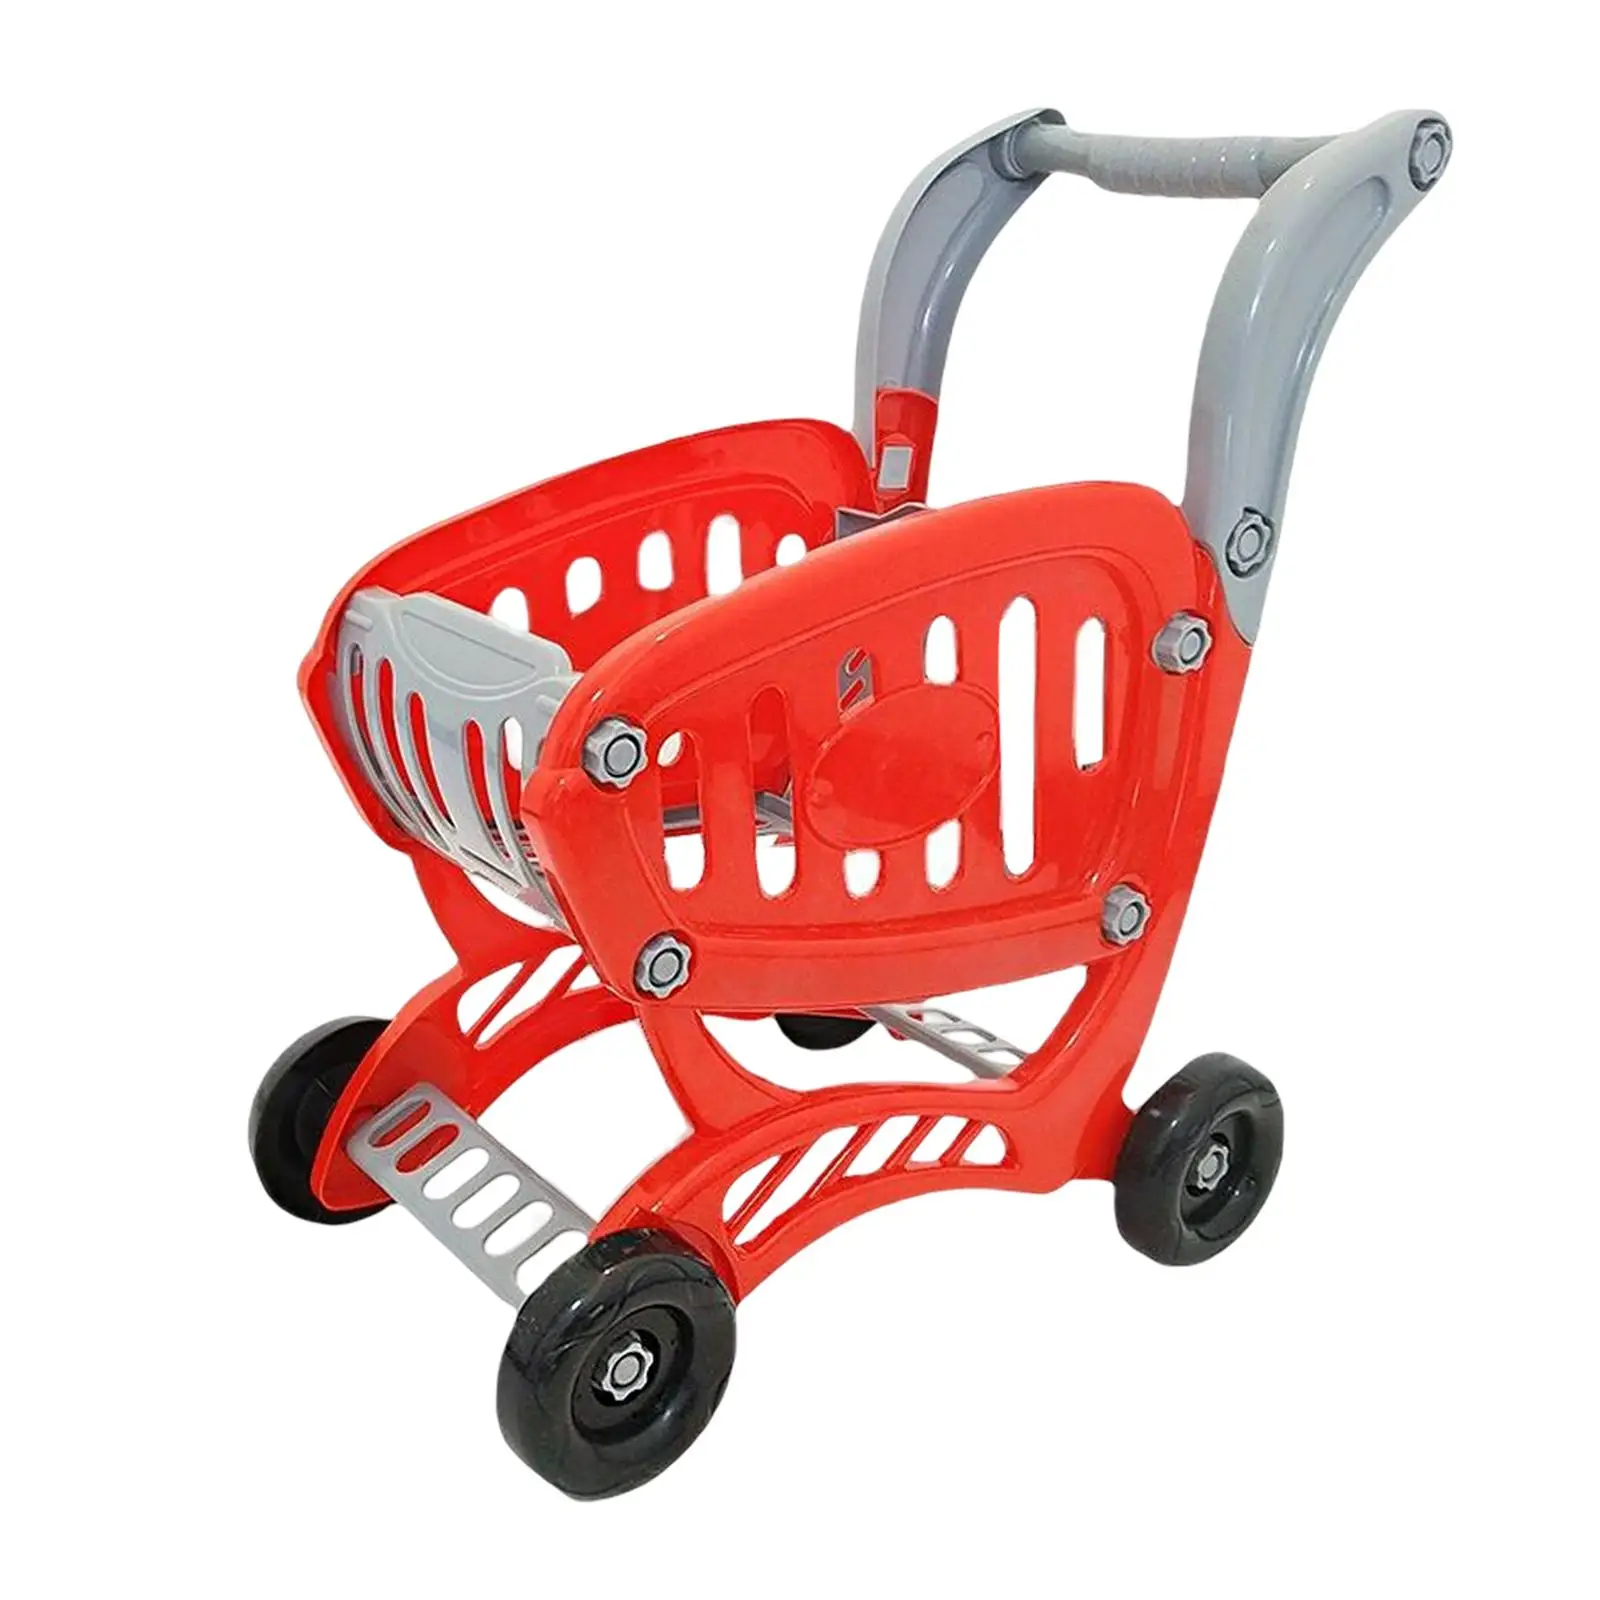 Funny Mini Shop Shopping Trolley Toy for Toddler Preschool Early Educational